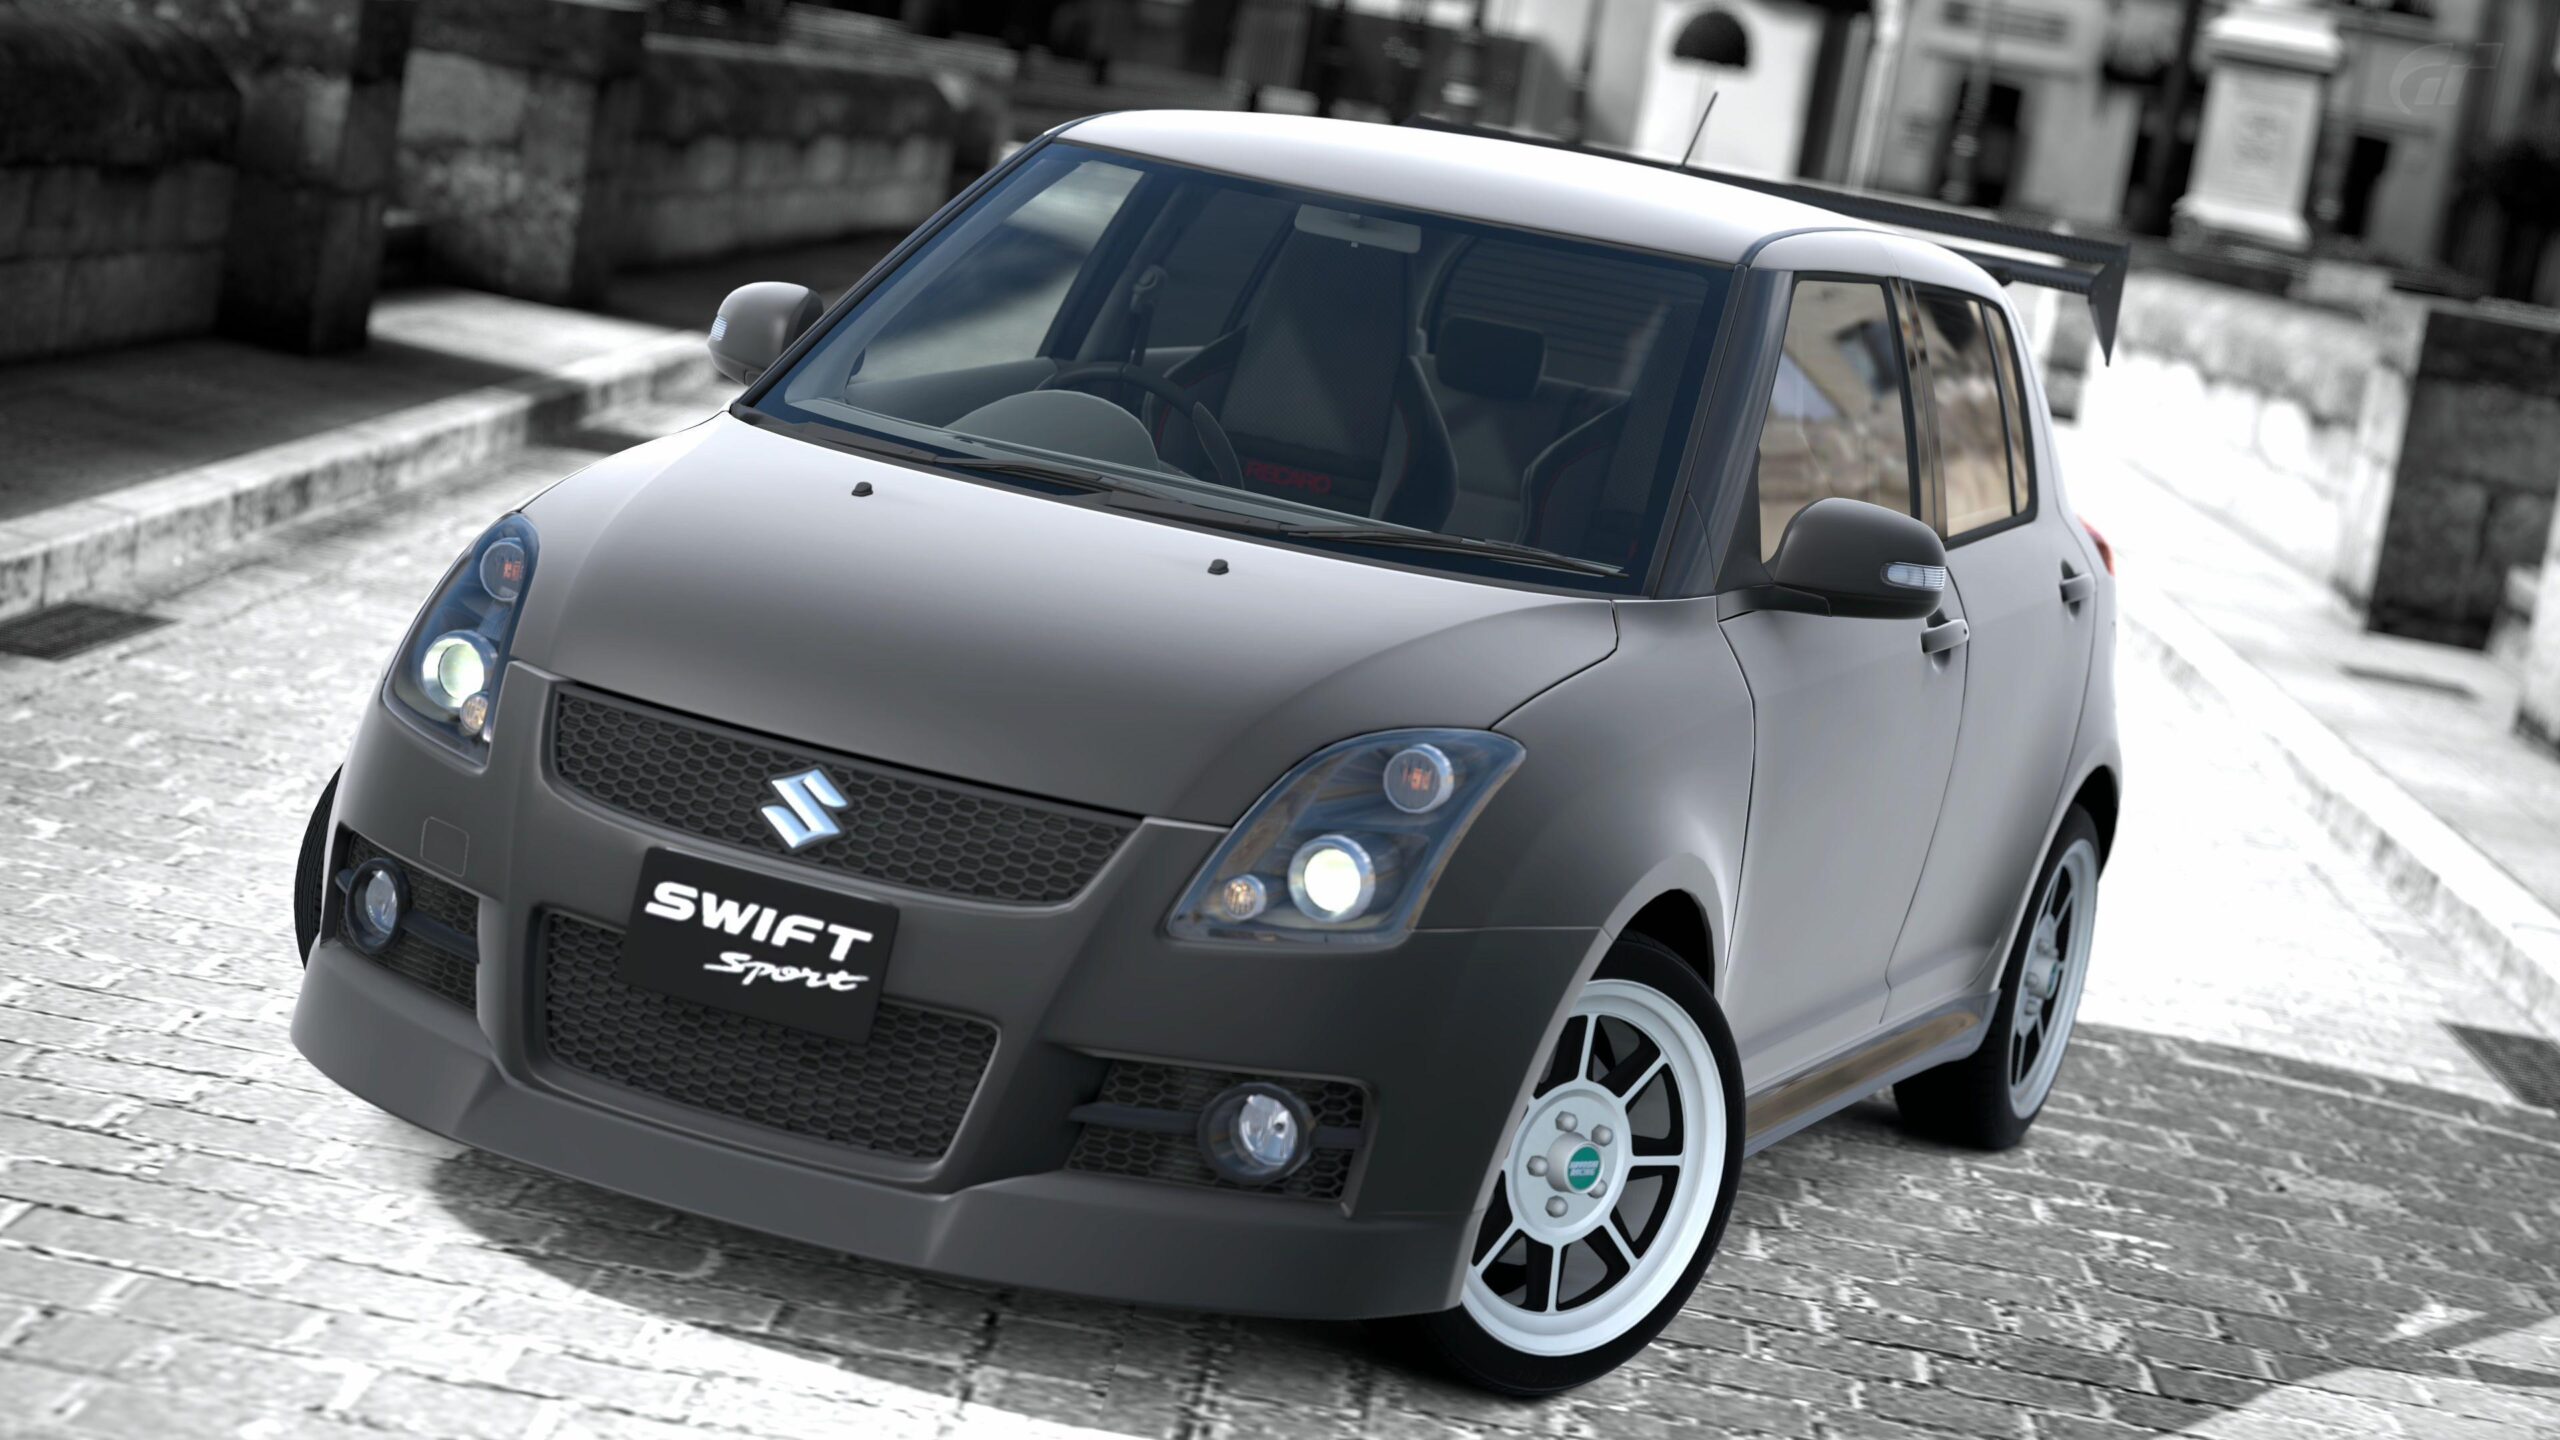 Suzuki Swift Sport Wallpapers Image Photos Pictures Backgrounds